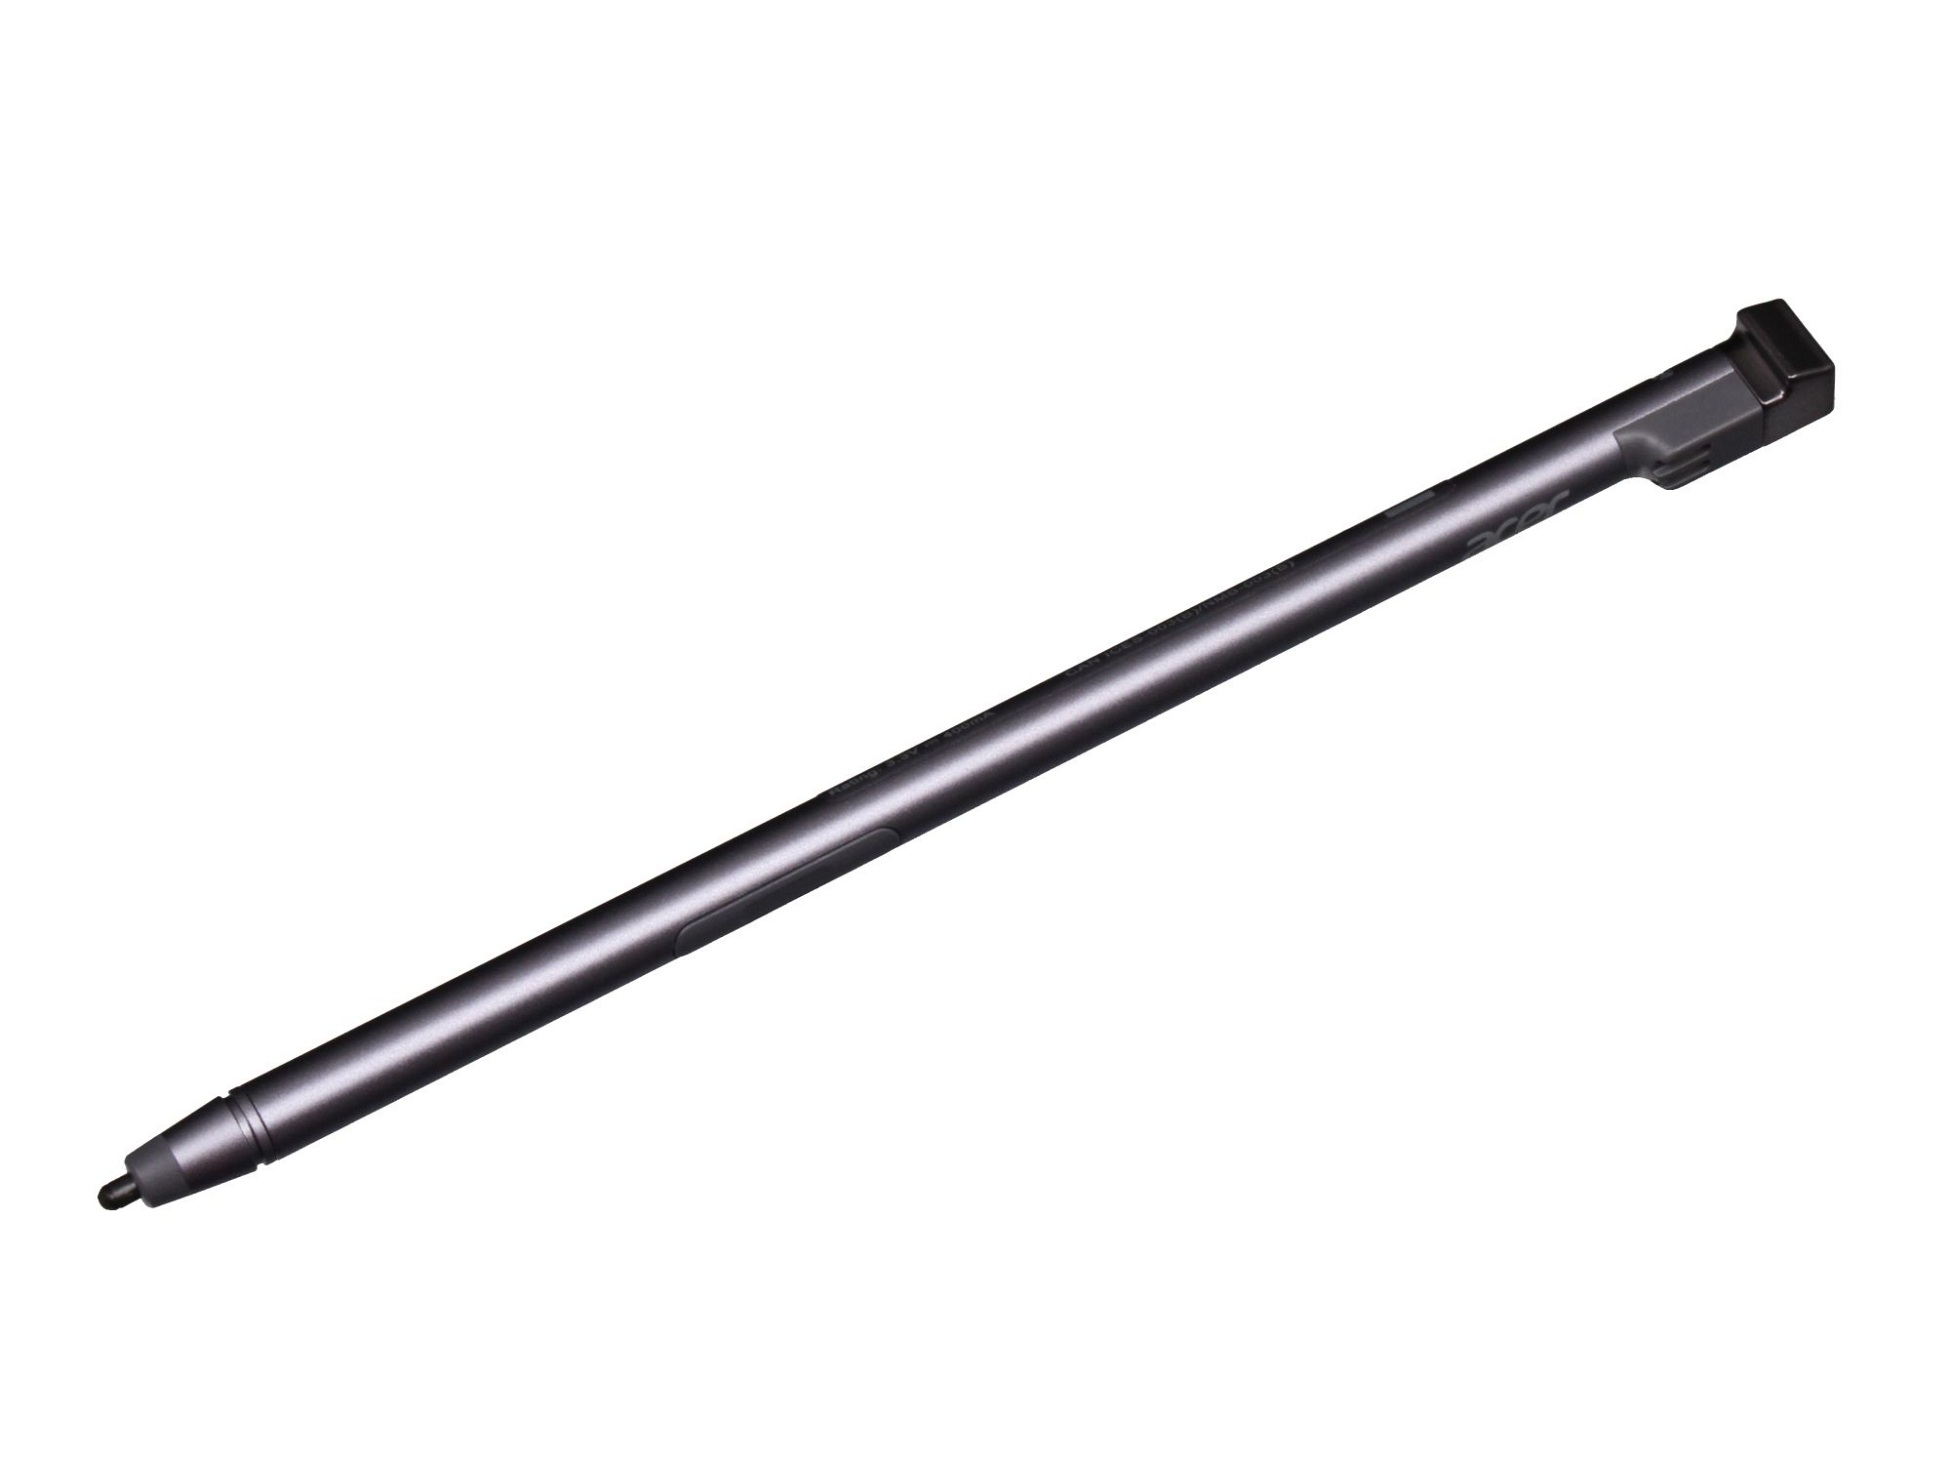 Acer CAN ICES-003(B)NMB003(B) Stylus Pen